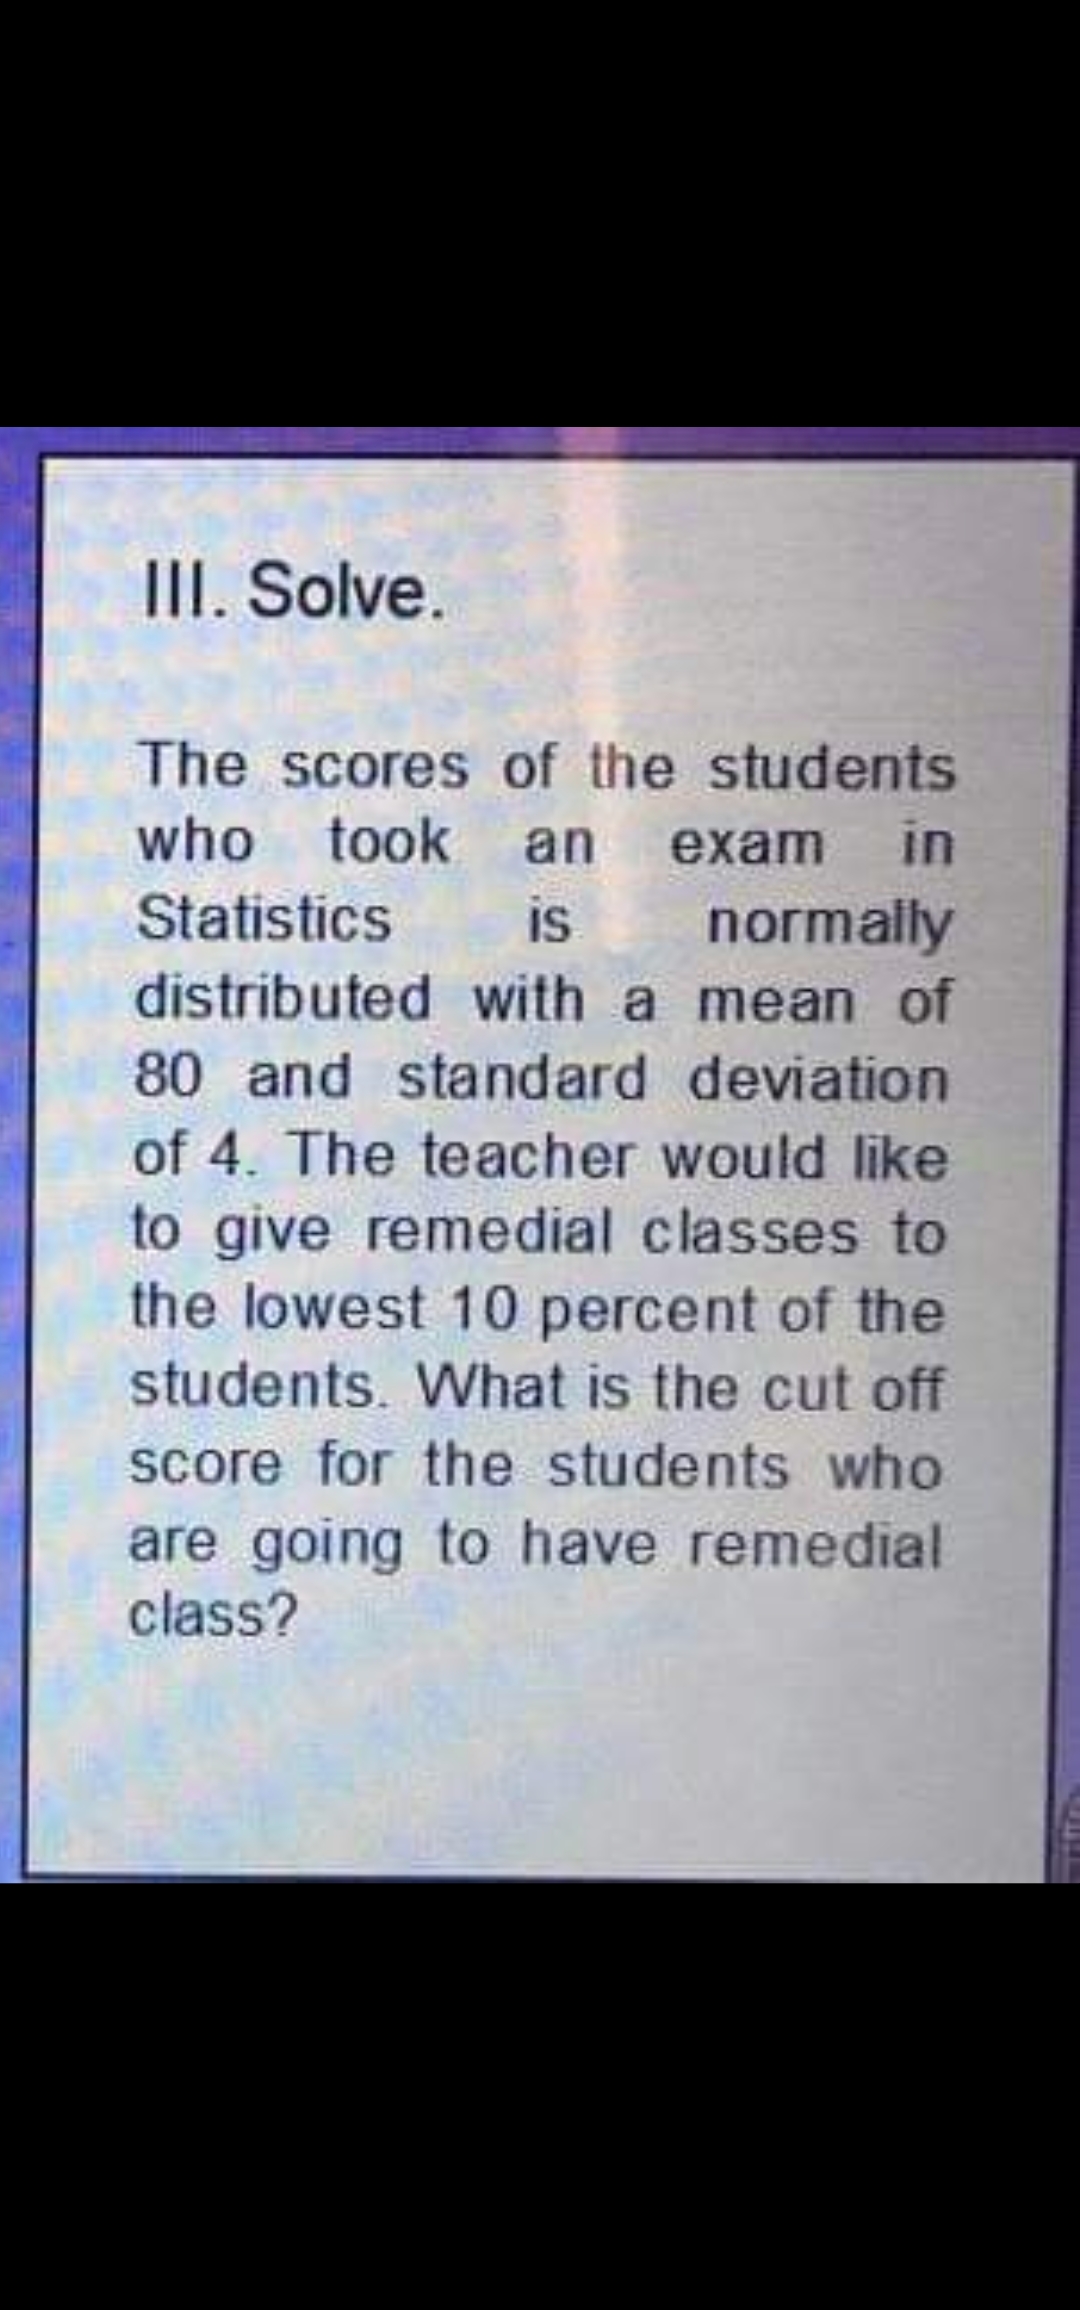 III. Solve.
The scores of the students
who took an exam in
Statistics
is
normally
distributed with a mean of
80 and standard deviation
of 4. The teacher would like
to give remedial classes to
the lowest 10 percent of the
students. What is the cut off
score for the students who
are going to have remedial
class?